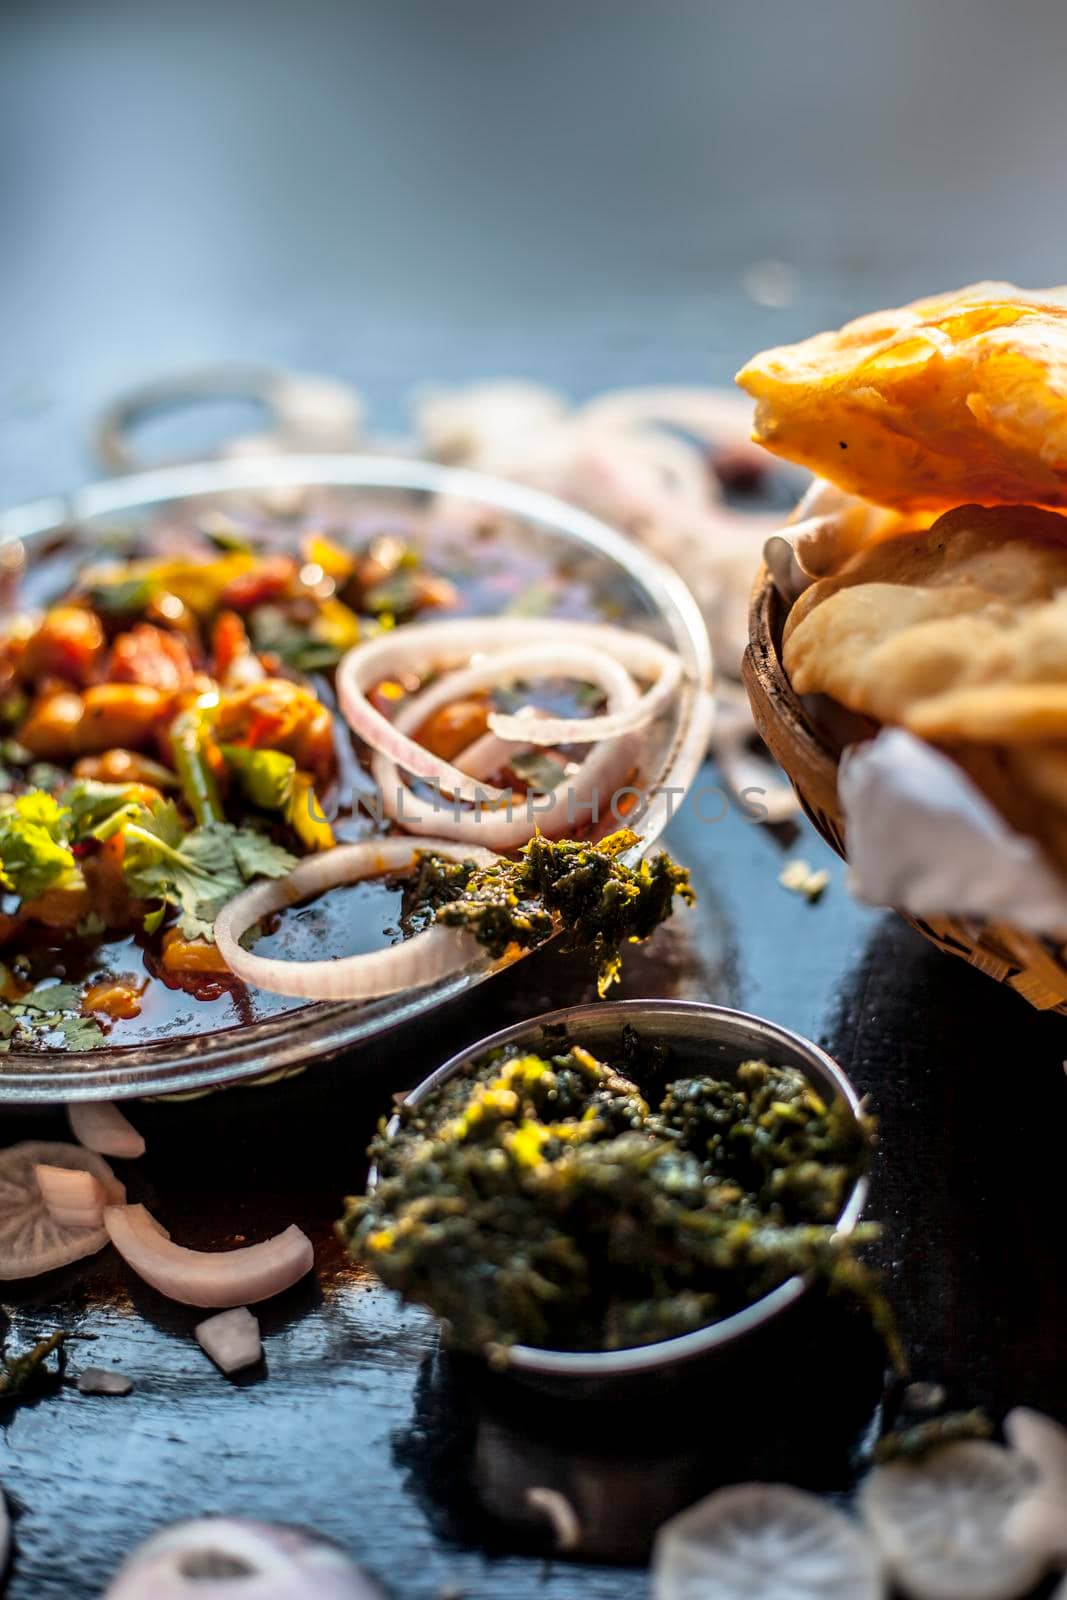 Full breakfast plate on the black surface. Indian Delhi style Chole bhature along with some onion rings and pudhina/mint chutney on a black surface.